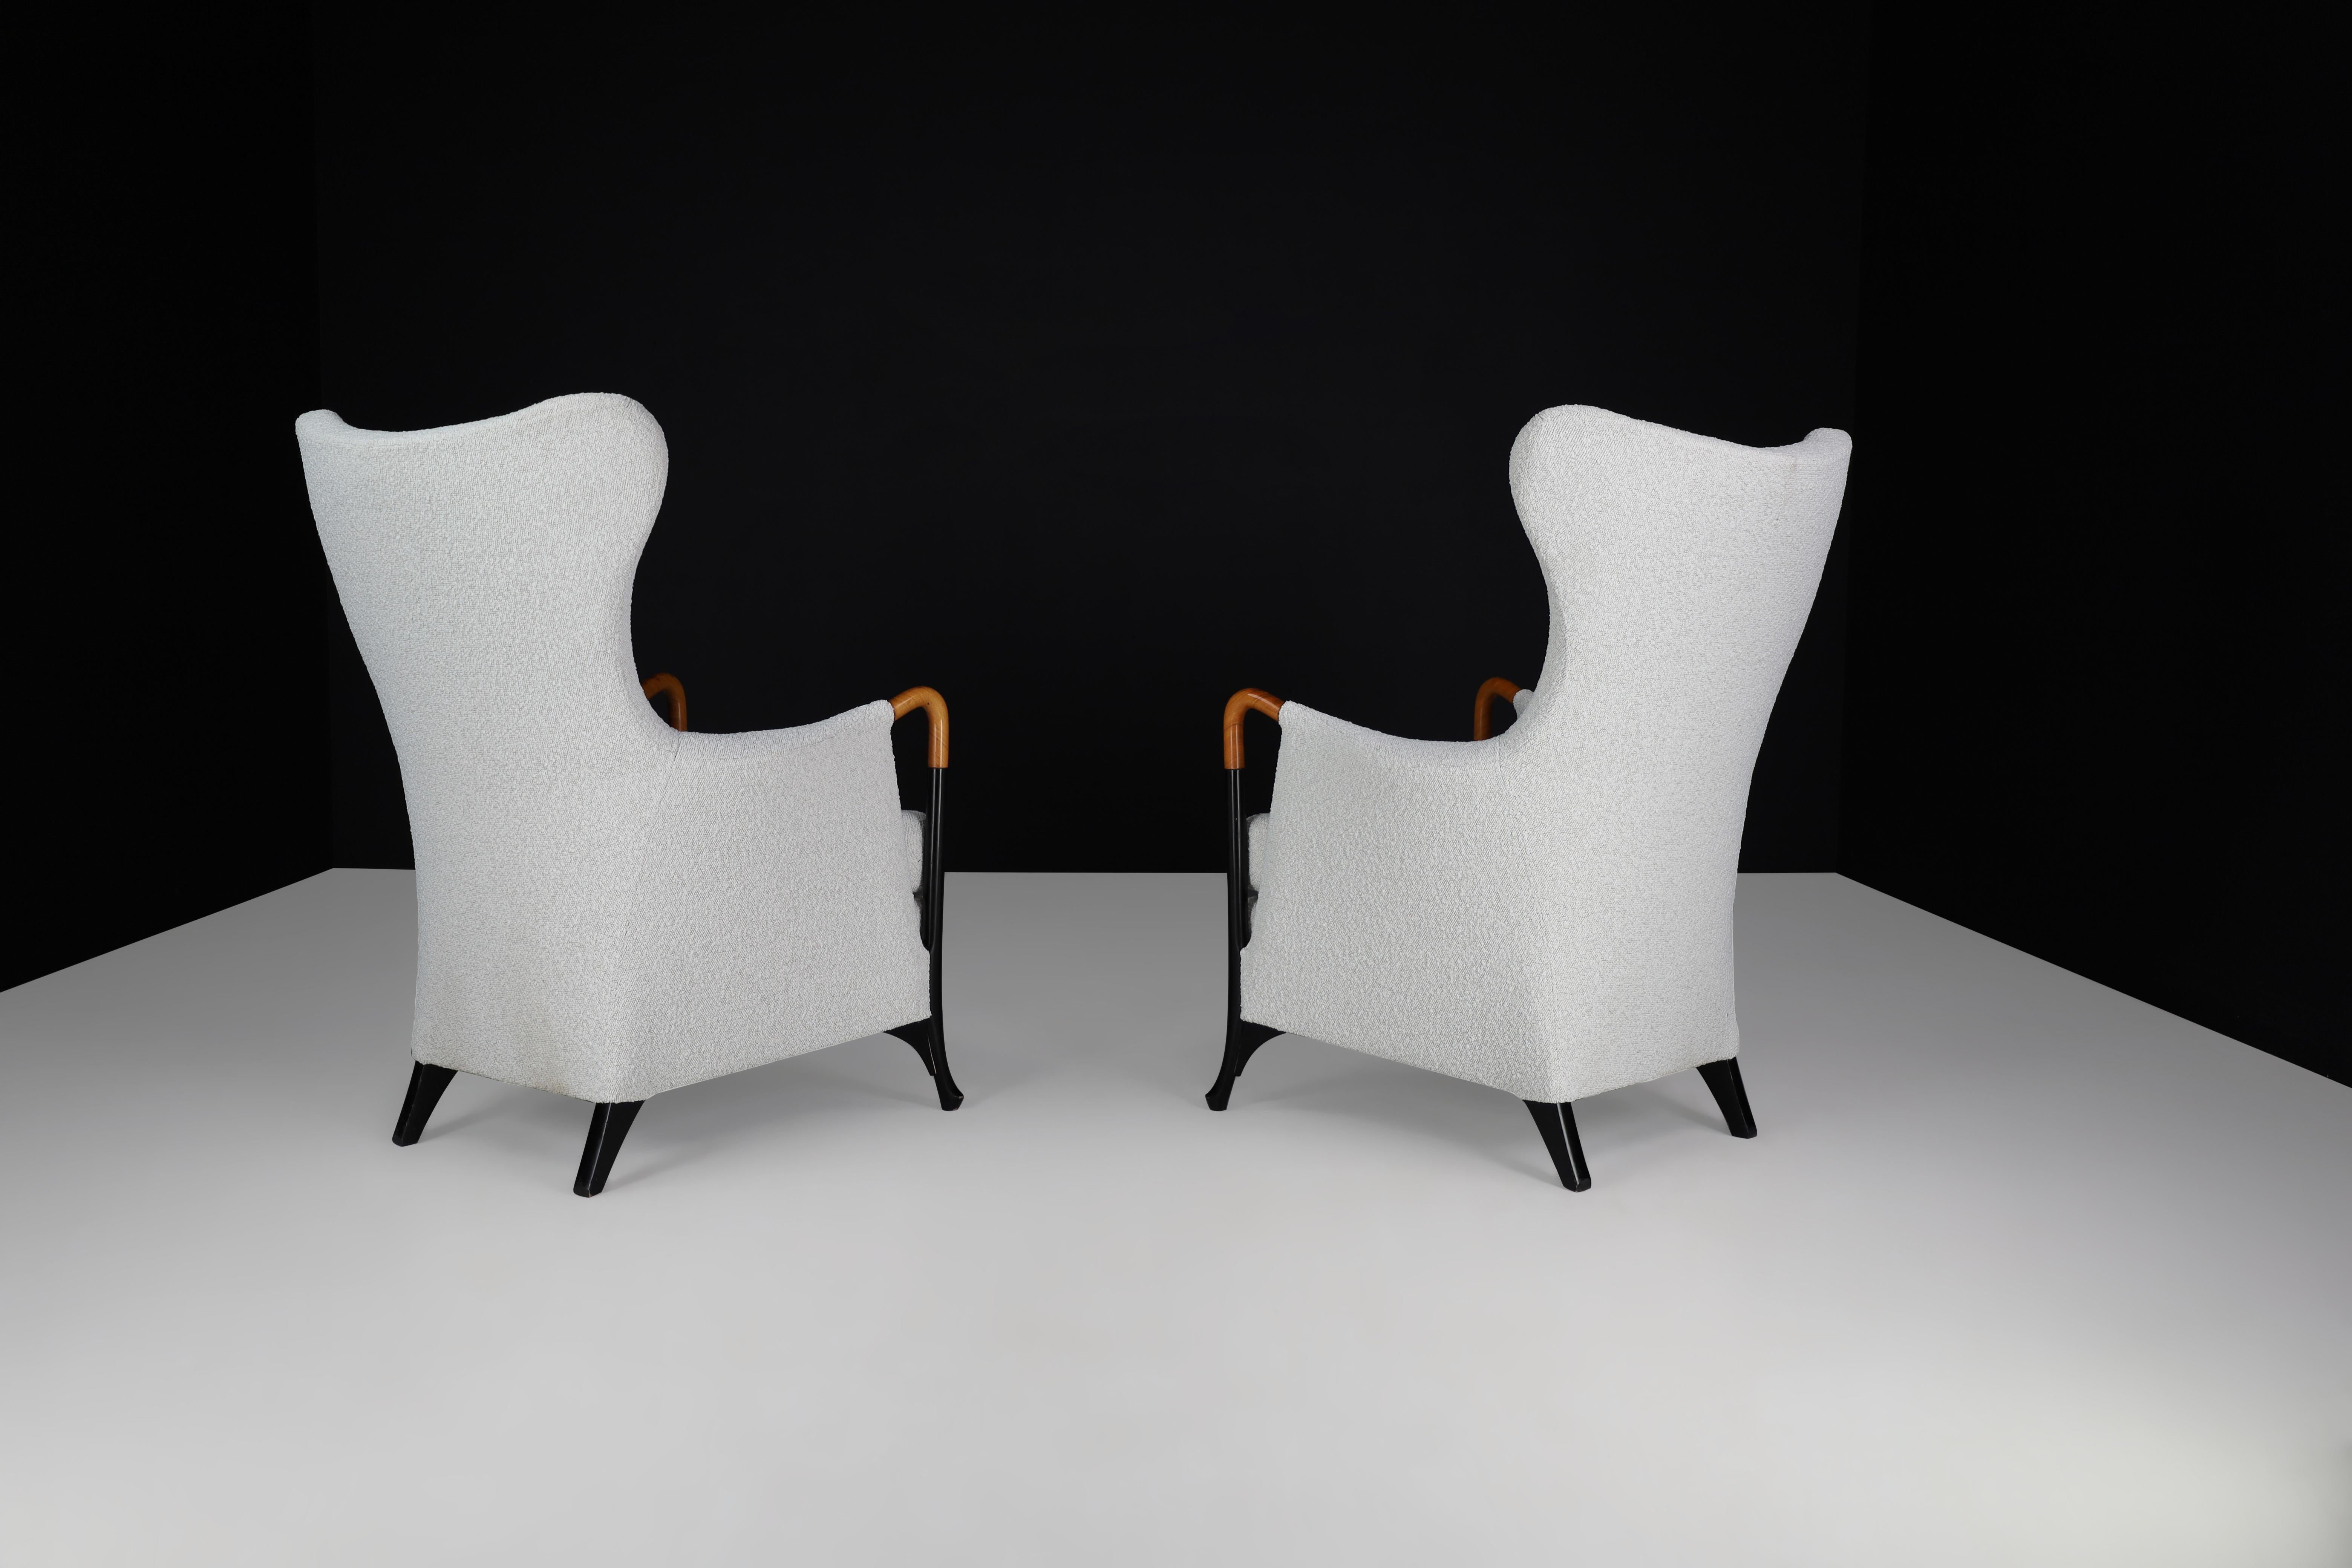 Umberto Asnago Highback Chairs for Giorgetti-Progetti Italy, 1980s For Sale 5